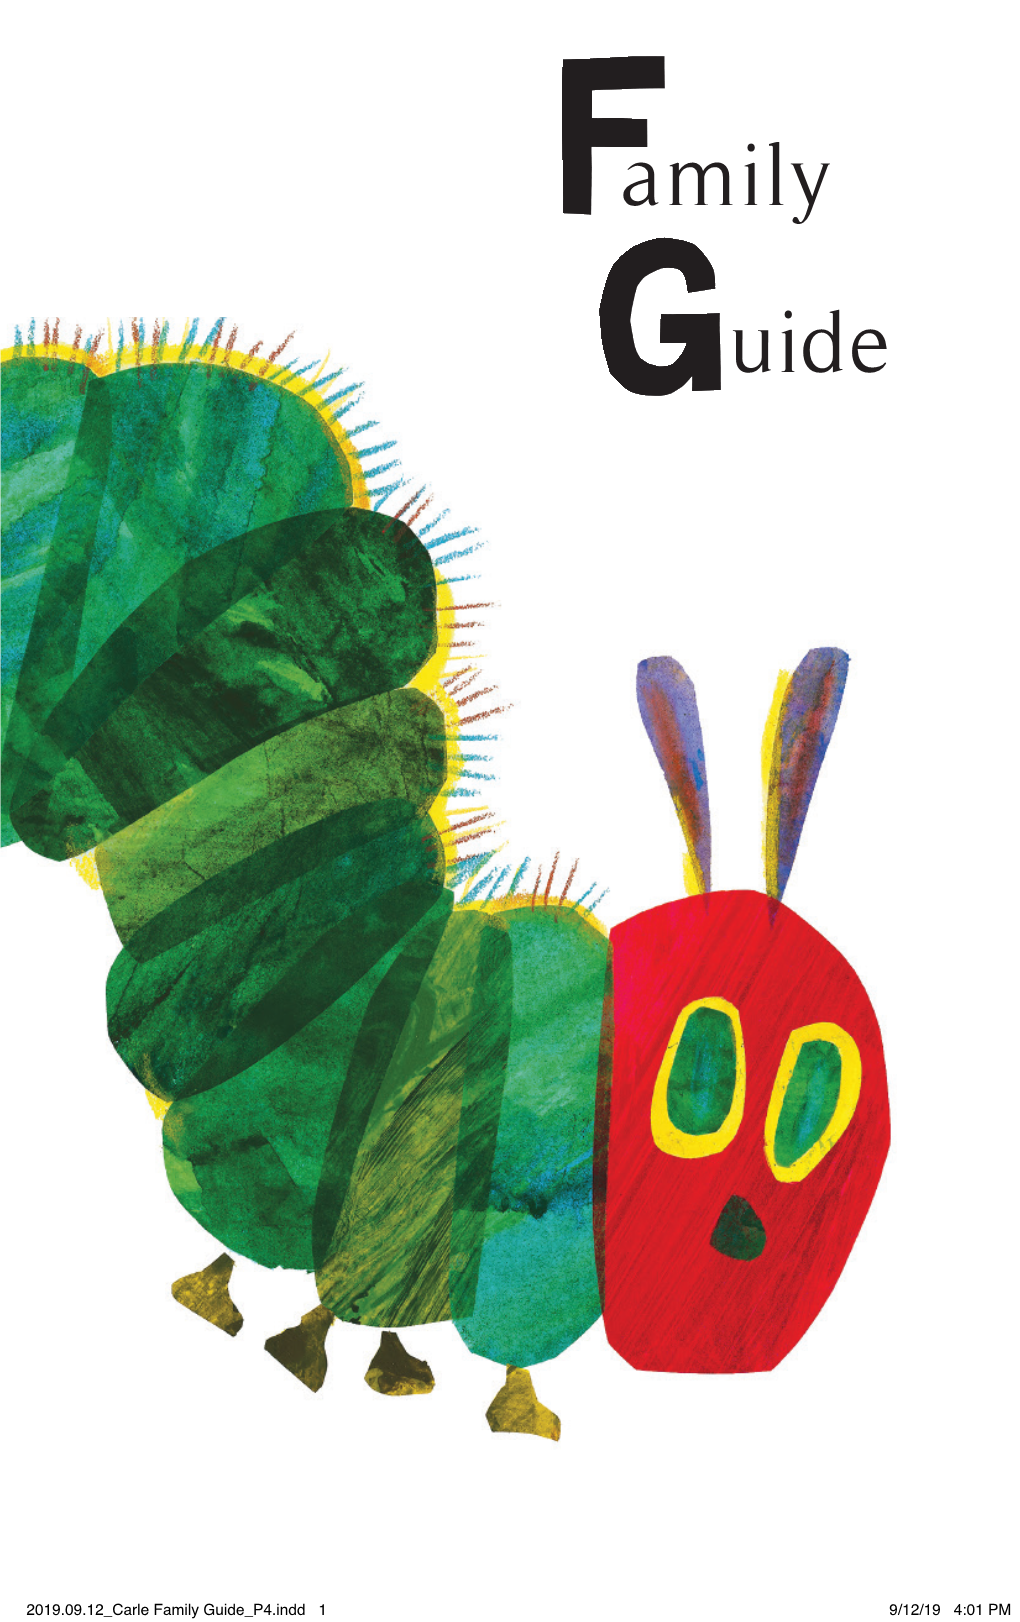 The Very Hungry Caterpillar—Turns Fifty and Carle Himself Turns Ninety